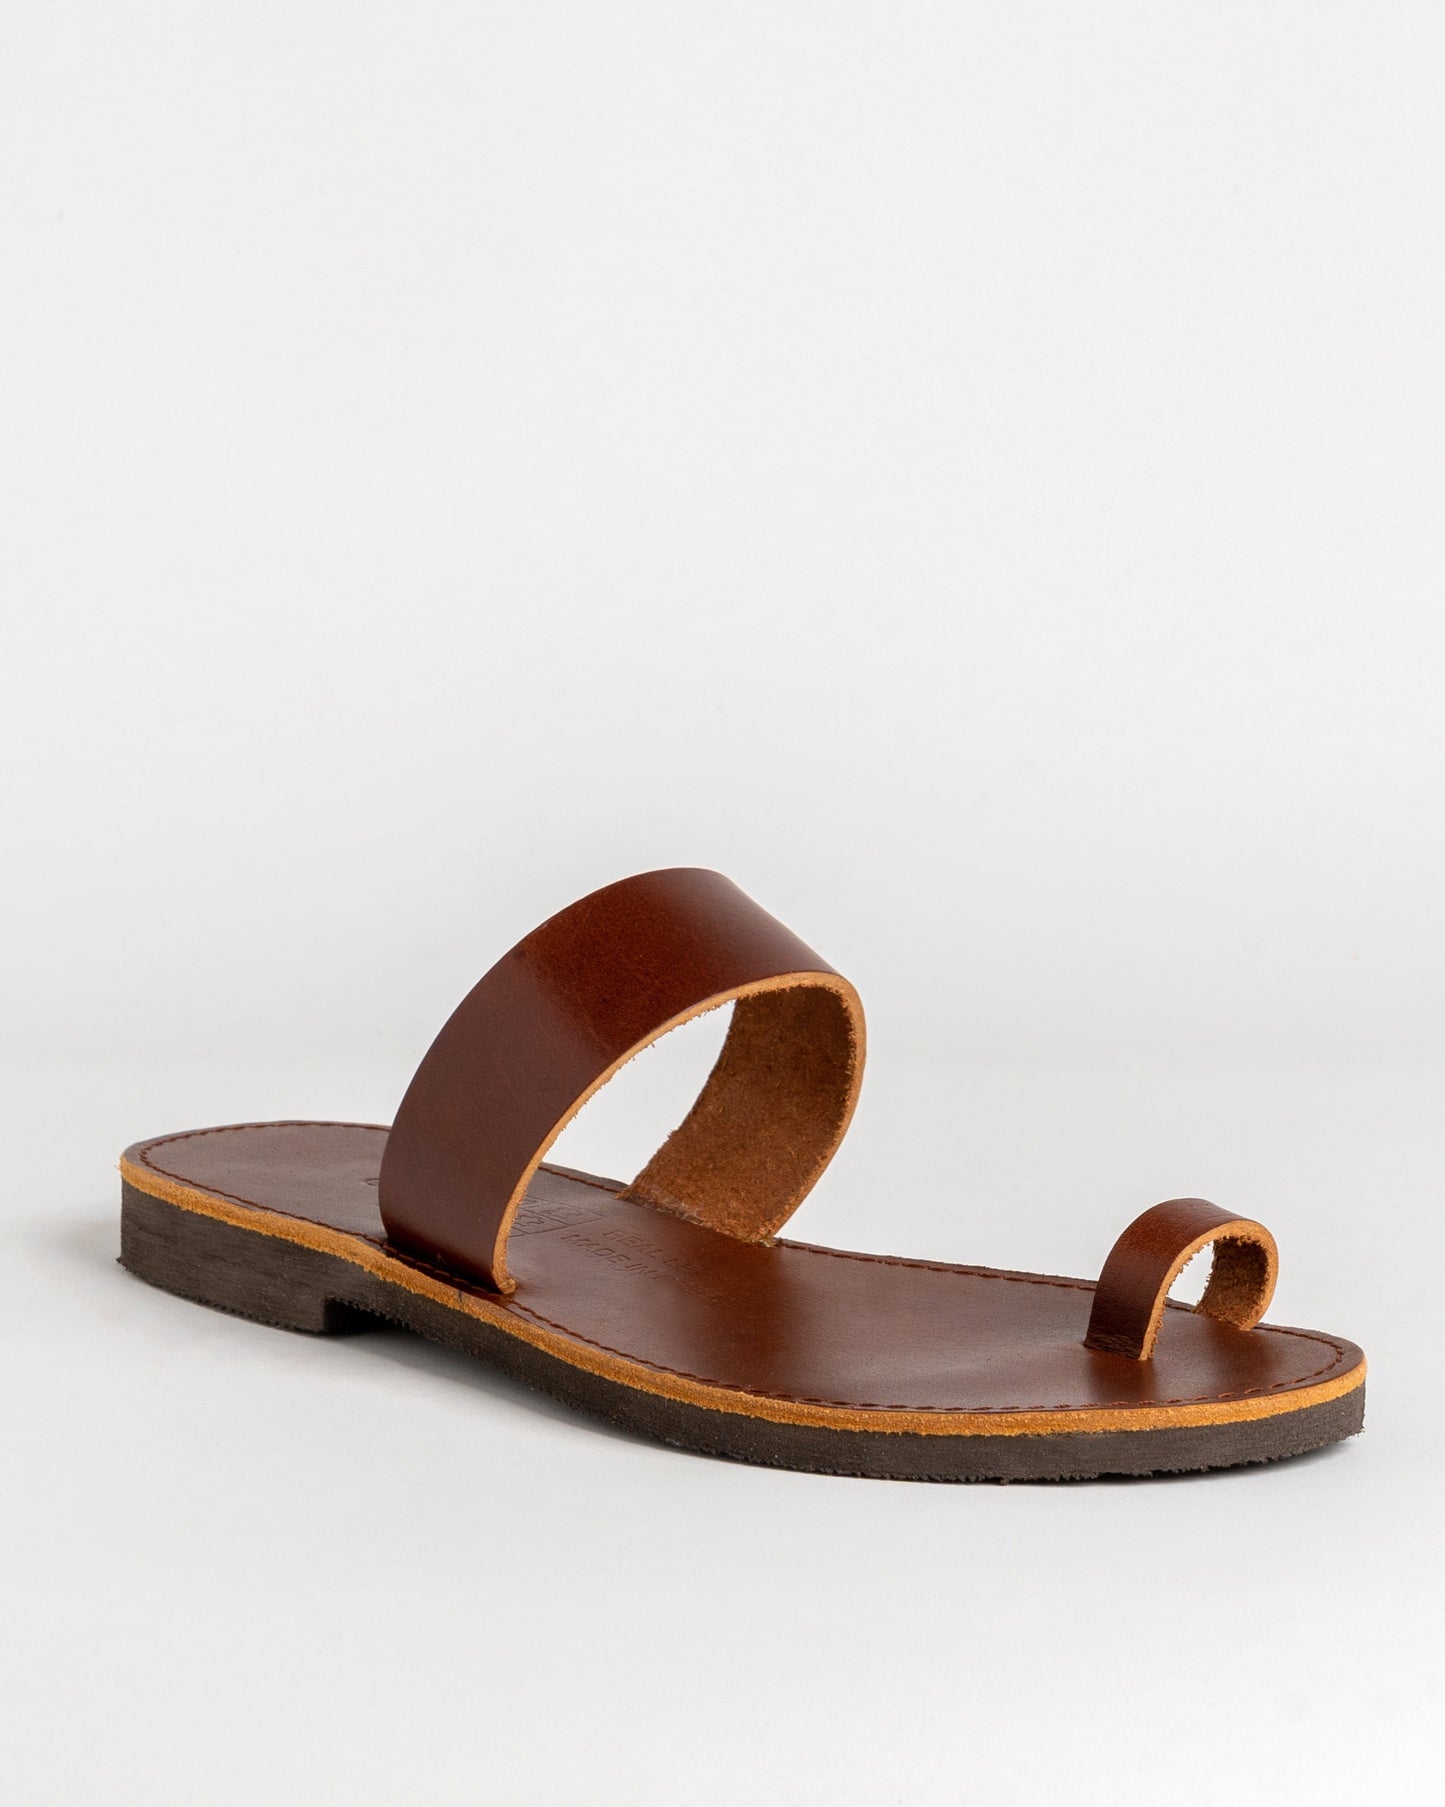 Leather women sandals, Toe ring leather sandals, Natural leather barefoot sandals, Classic Greek style sandals